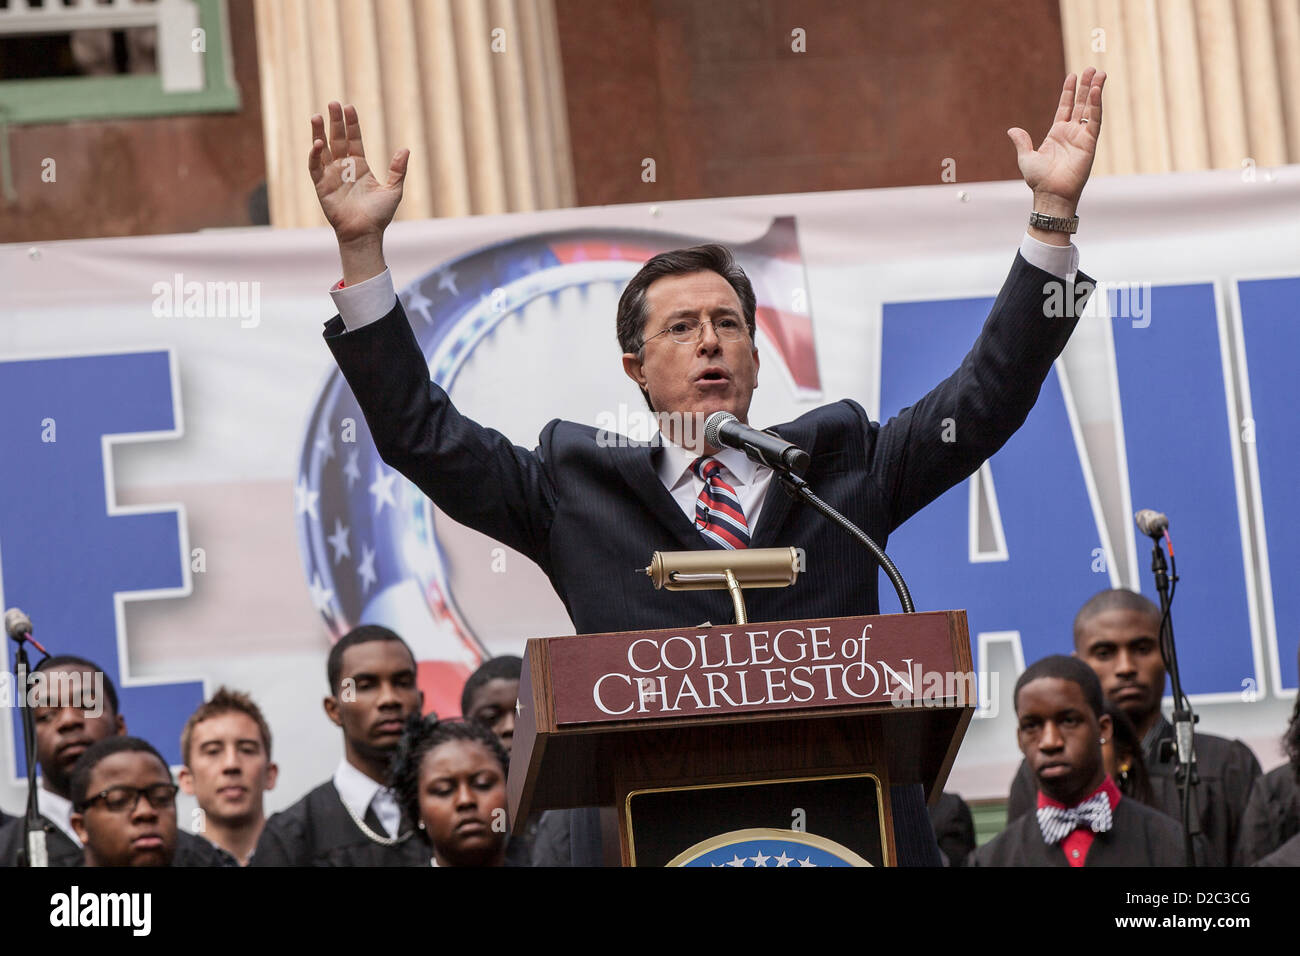 Comedian Stephen Colbert holds a rally with former Republican presidential candidate Herman Cain at the College of Charleston on January 20, 2012 in Charleston, South Carolina. Colbert held the event with Cain, titled Rock Me Like a Herman Cain South Cain-olina Primary Rally, as part of his pseudo-run for president of The United States of South Carolina. Stock Photo